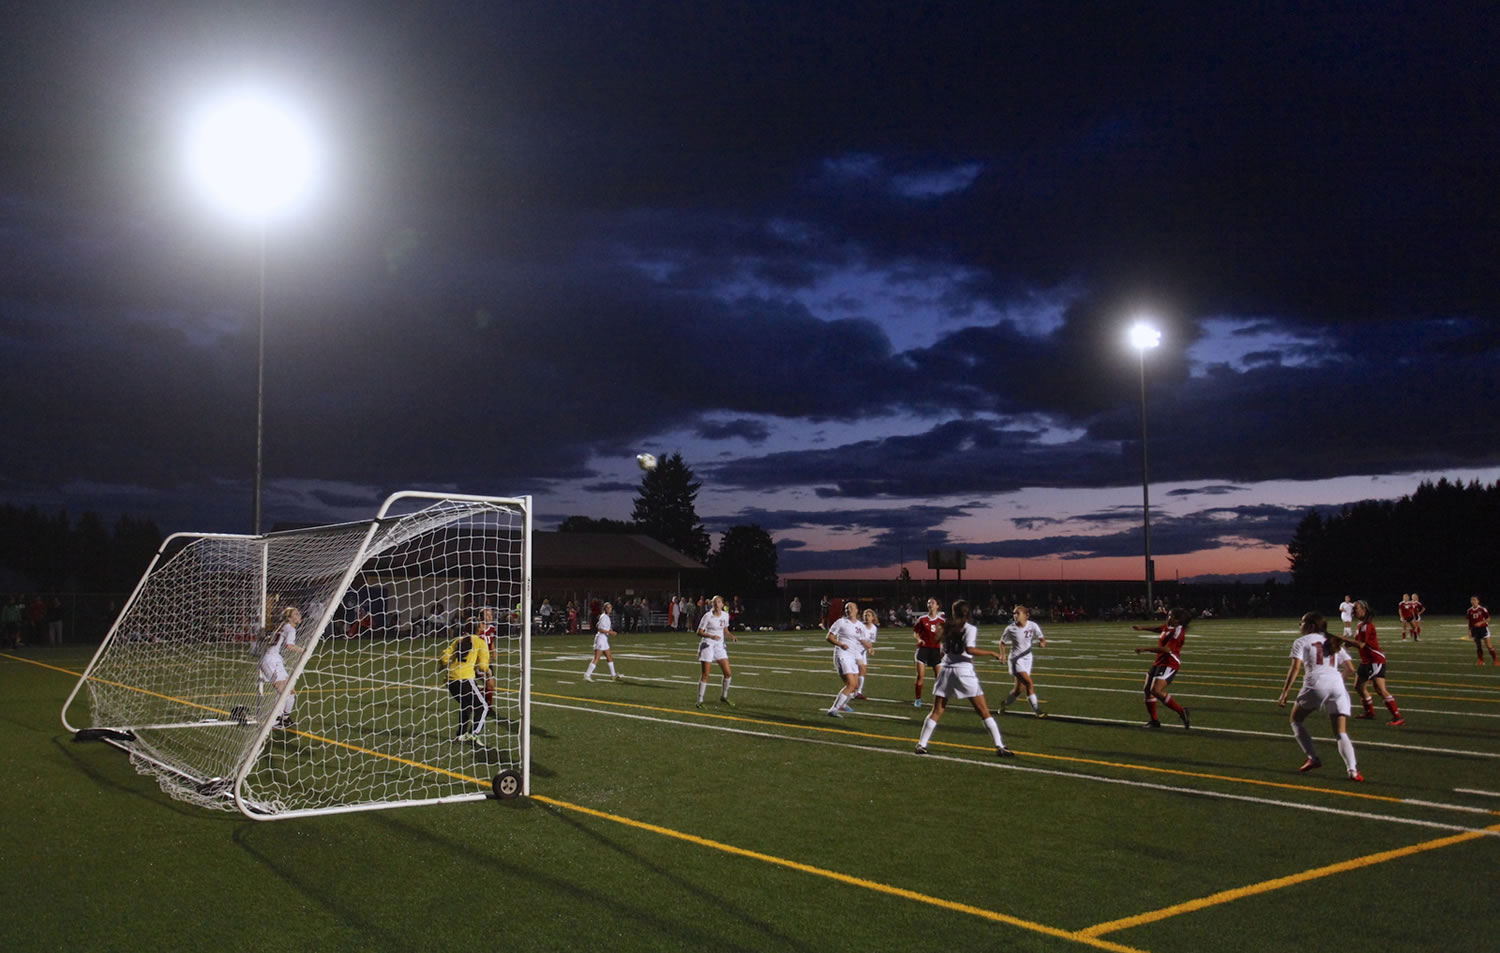 The Prairie and Camas girls soccer teams play the first night match under the newly installed lights at Prairie High School's on-campus field.